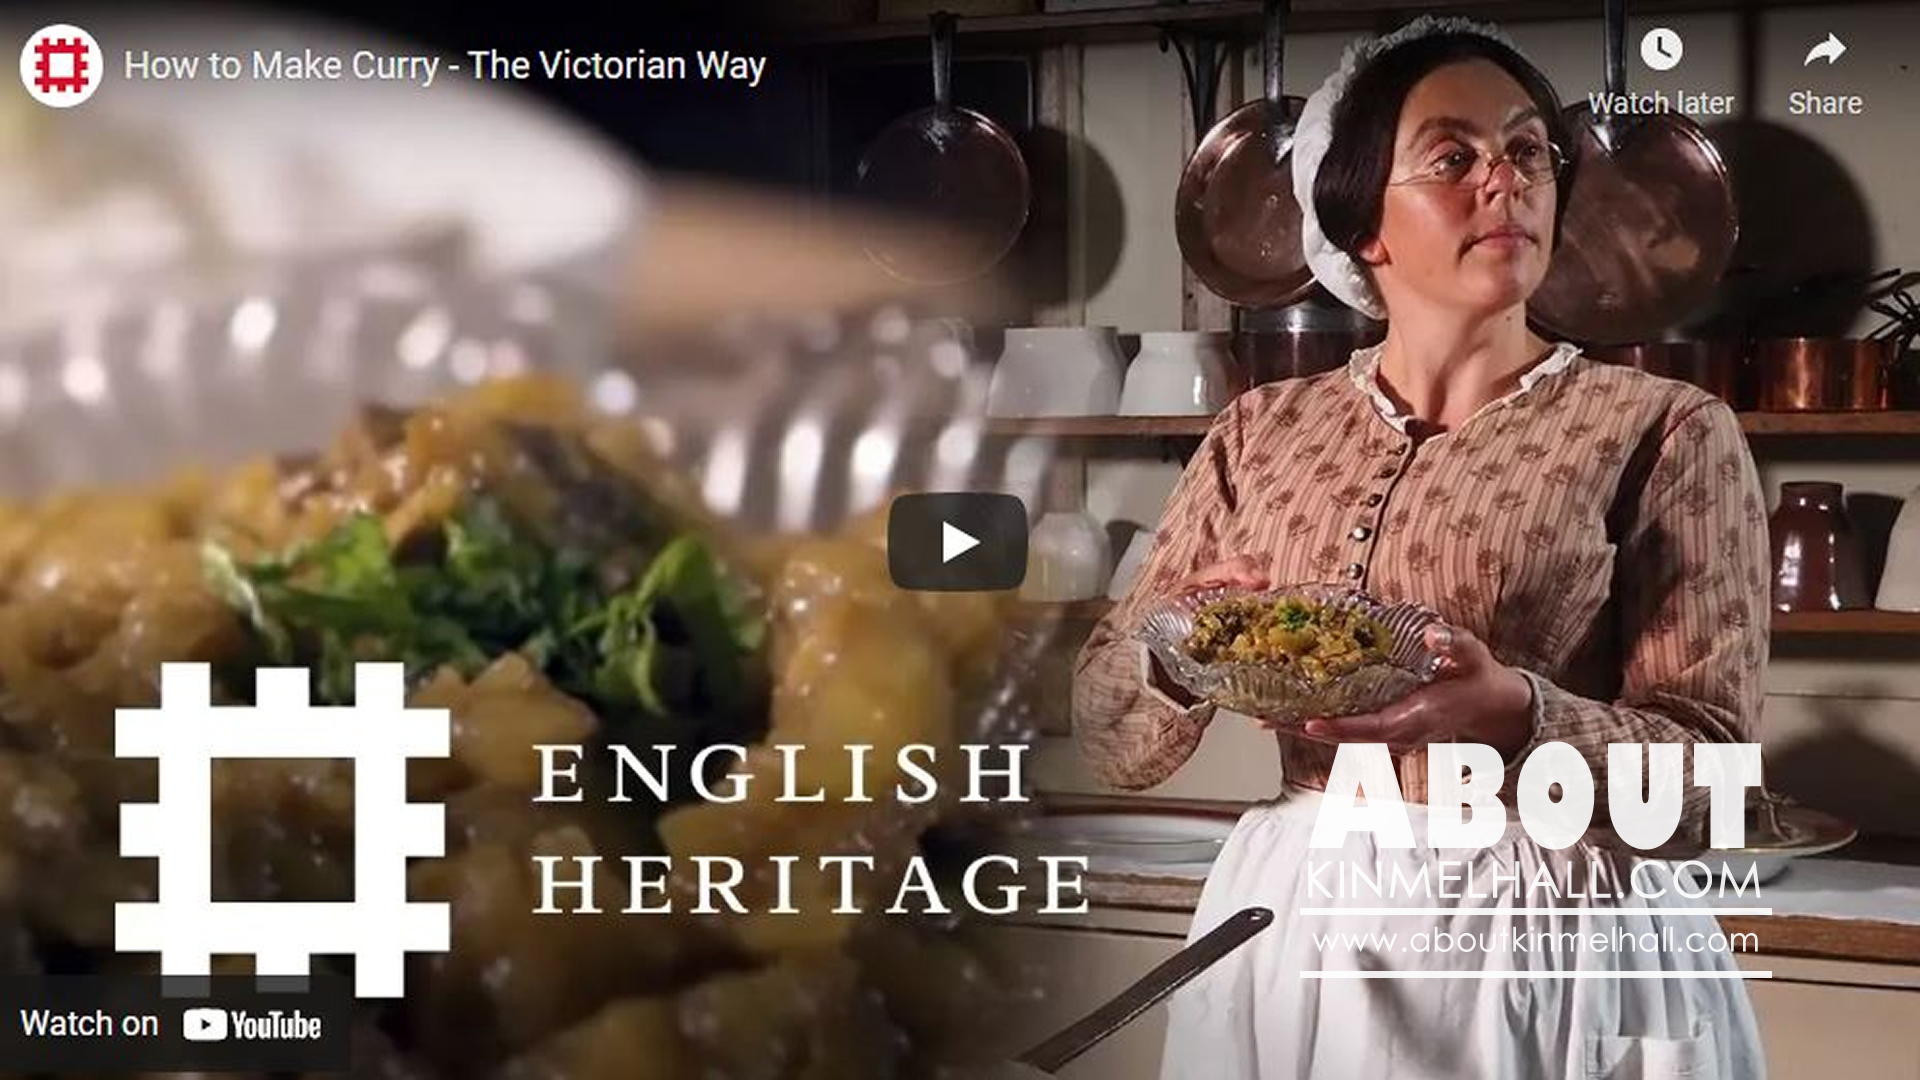 Education Resources - Victorian Cookery Session 21 by English Heritage